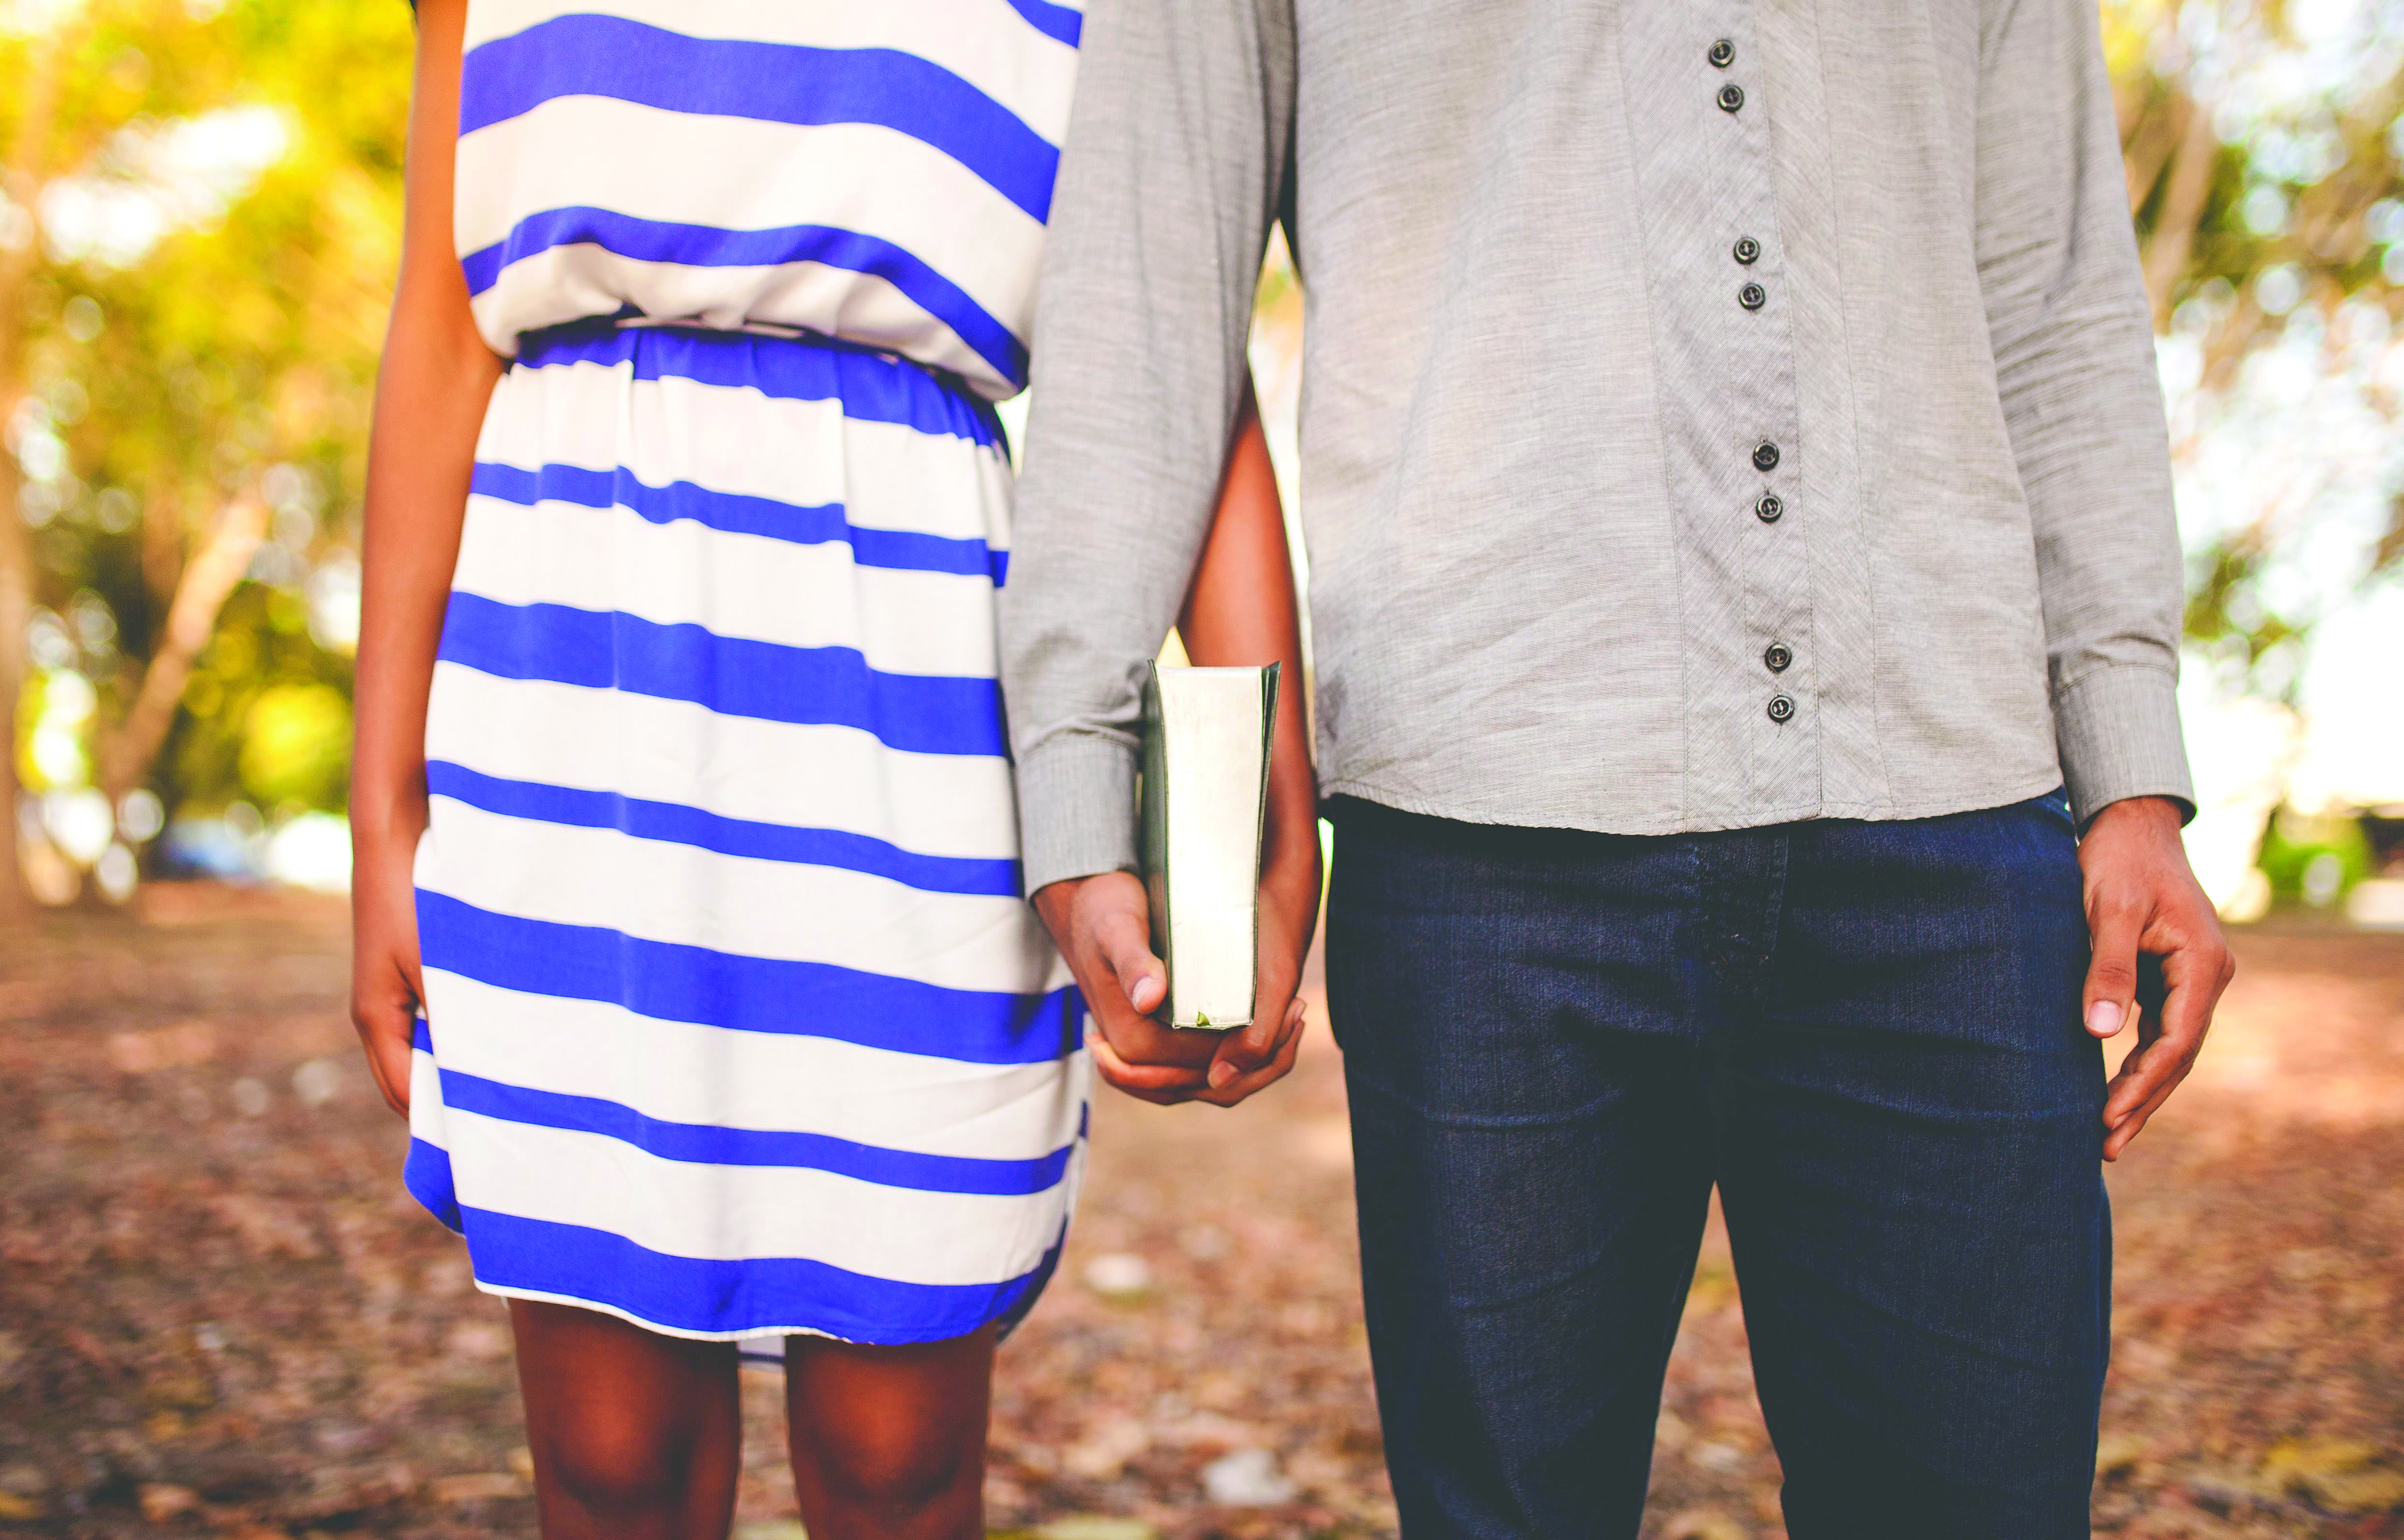 Swiping right for Christian dating - ZU Media